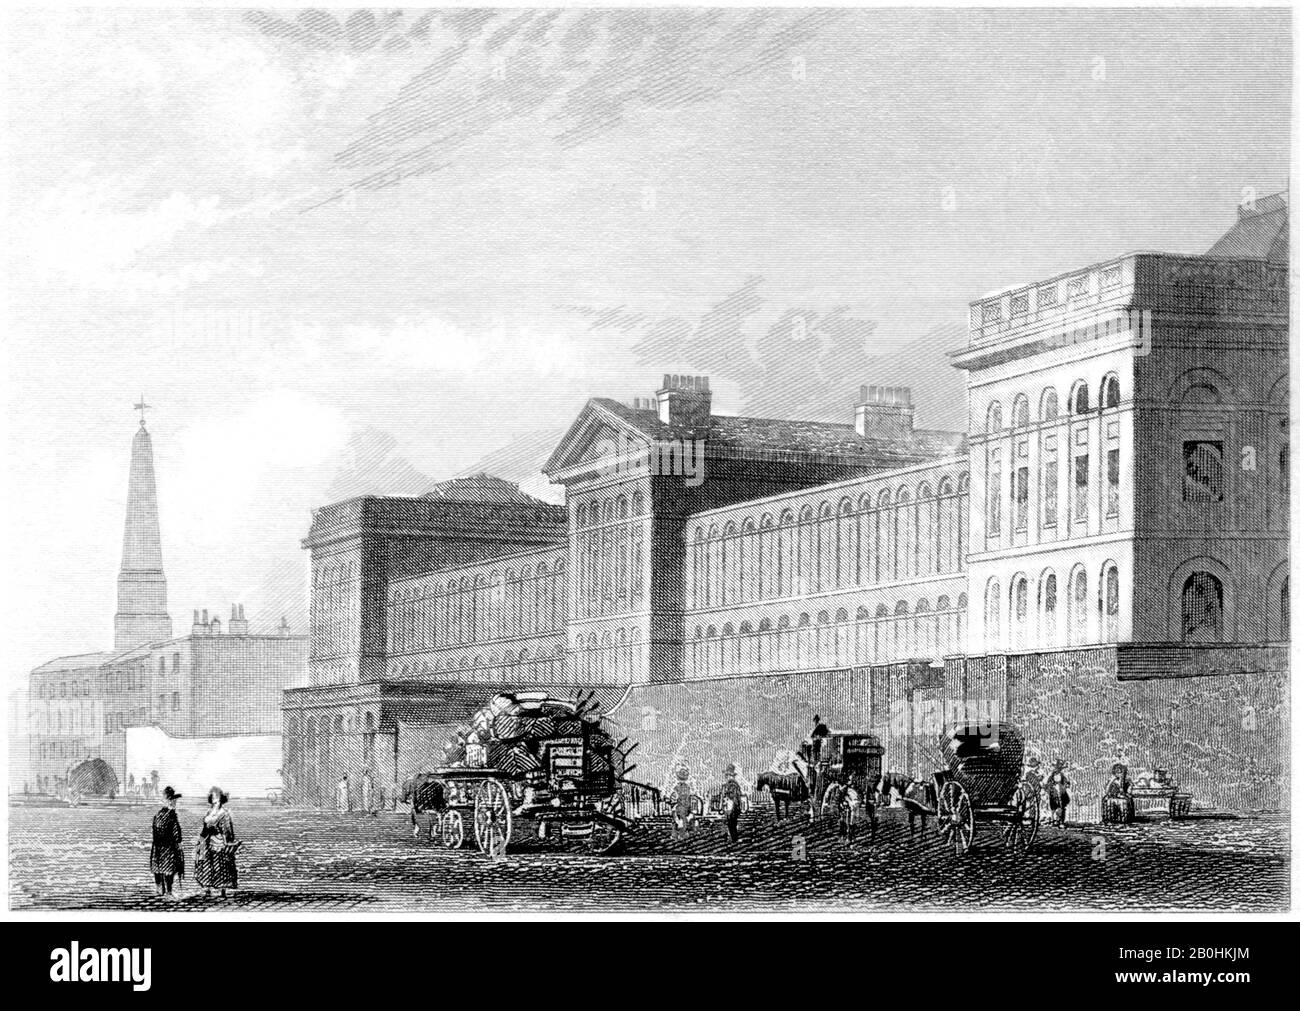 Engraving of the St Lukes Hospital, London scanned at high resolution from a book printed in 1851. This image is believed to be free of all copyright. Stock Photo